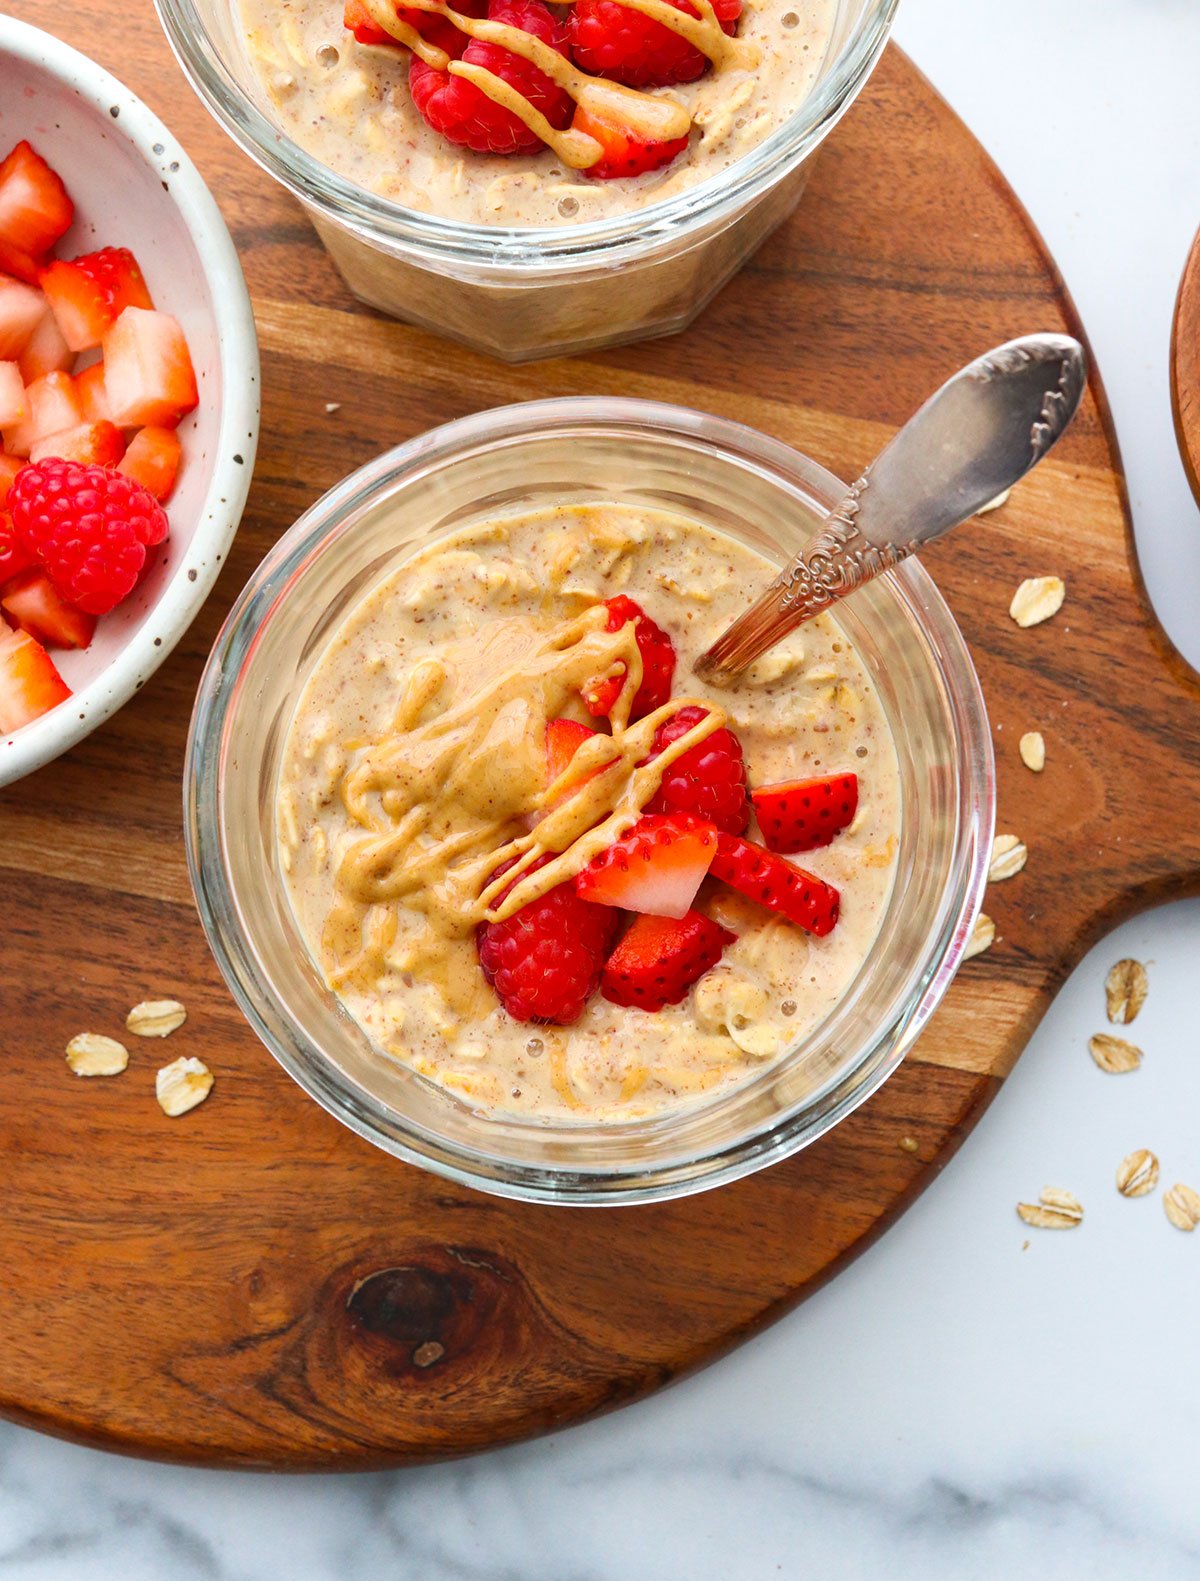 strawberries served on top of peanut butter overnight oats.